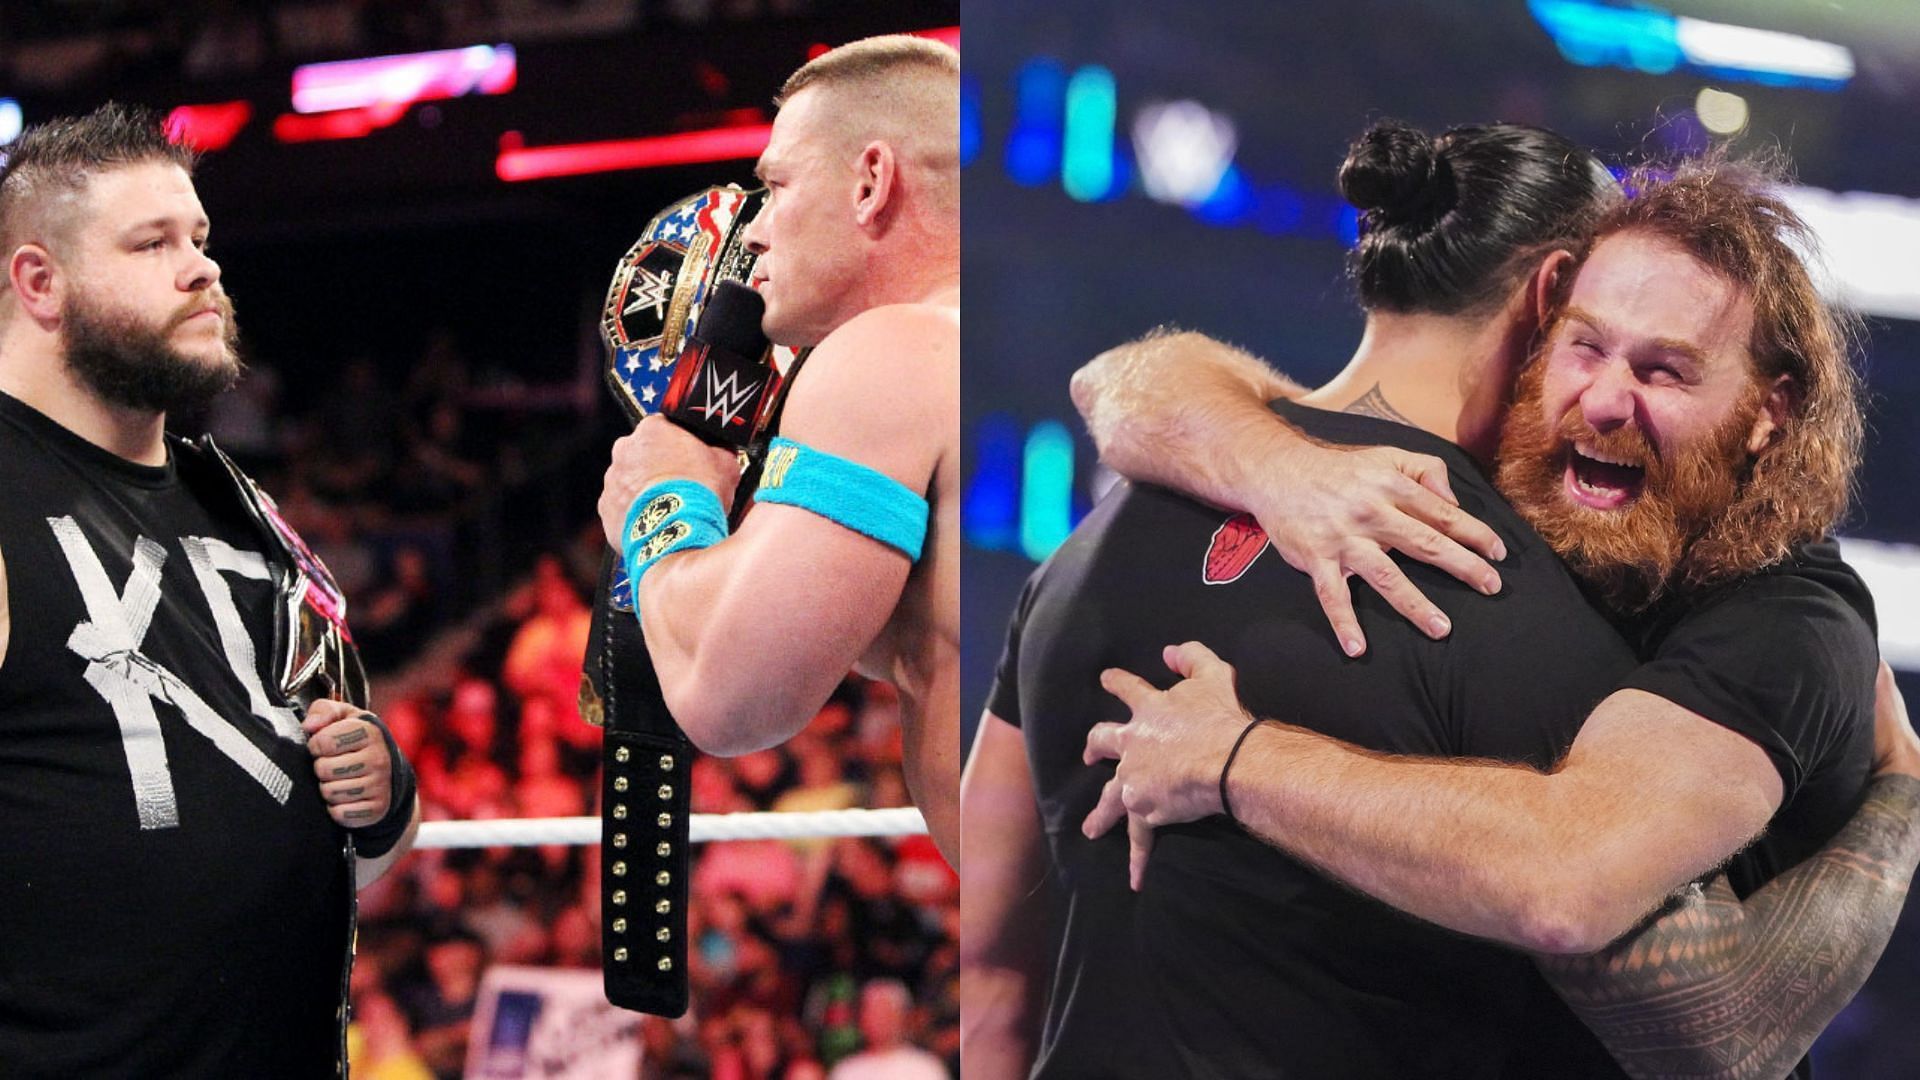 John Cena and Kevin Owens will team up against Roman Reigns and Sami Zayn